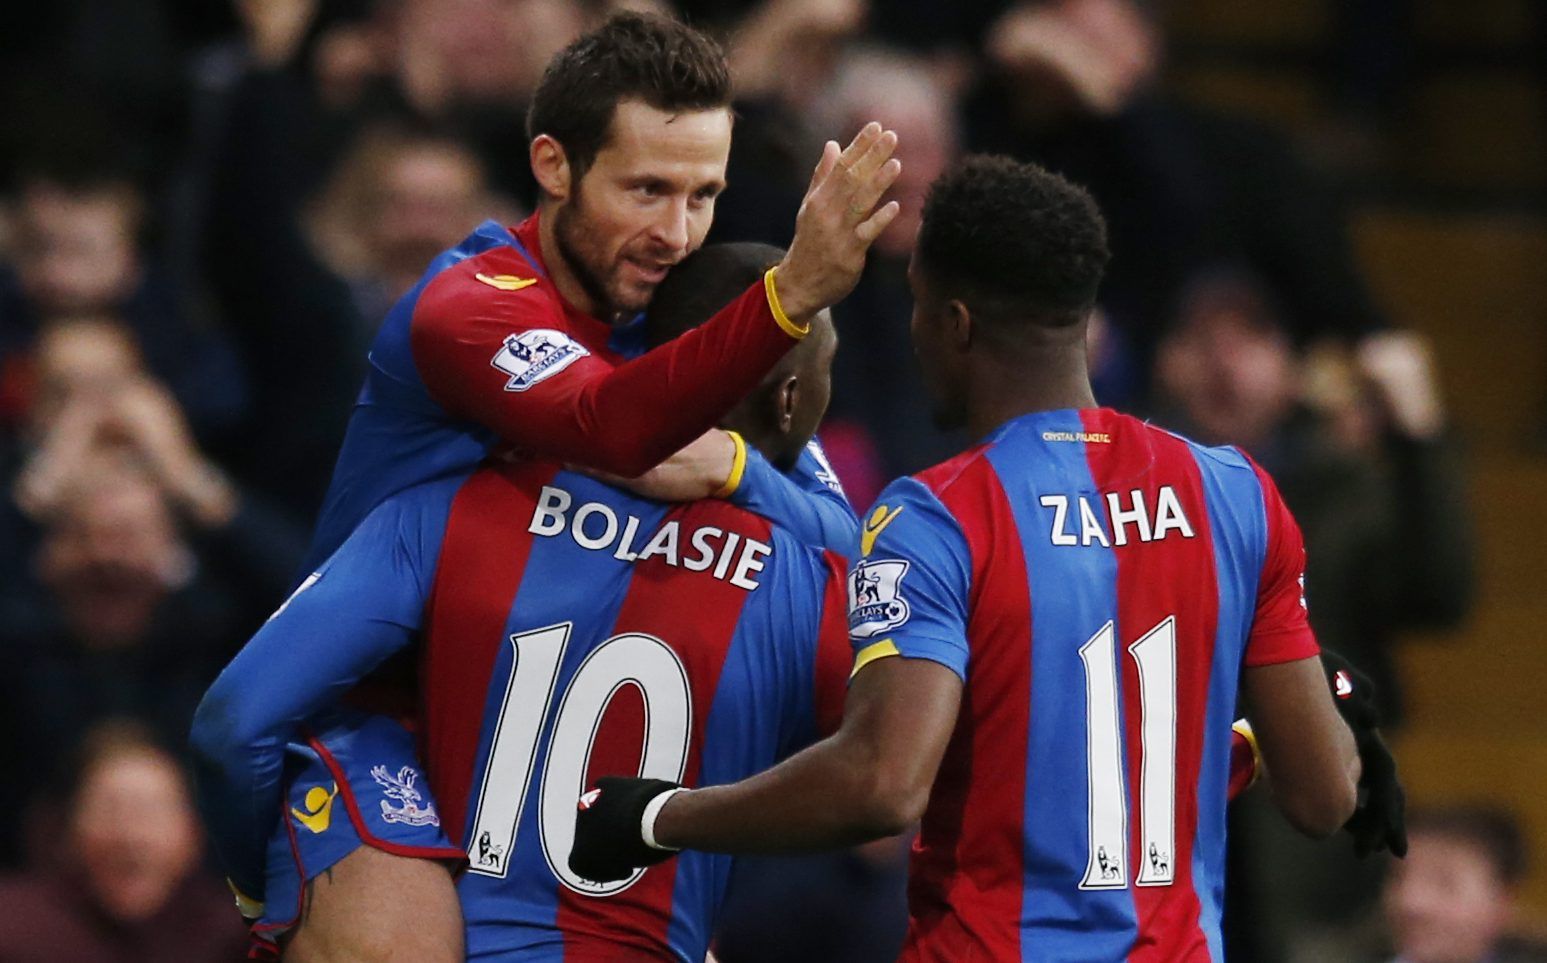 Football Soccer - Crystal Palace v Southampton - Barclays Premier League - Selhurst Park - 12/12/15
Yohan Cabaye celebrates scoring the first goal for Crystal Palace with Yannick Bolasie and Wilfried Zaha
Mandatory Credit: Action Images / Paul Childs
Livepic
EDITORIAL USE ONLY. No use with unauthorized audio, video, data, fixture lists, club/league logos or 